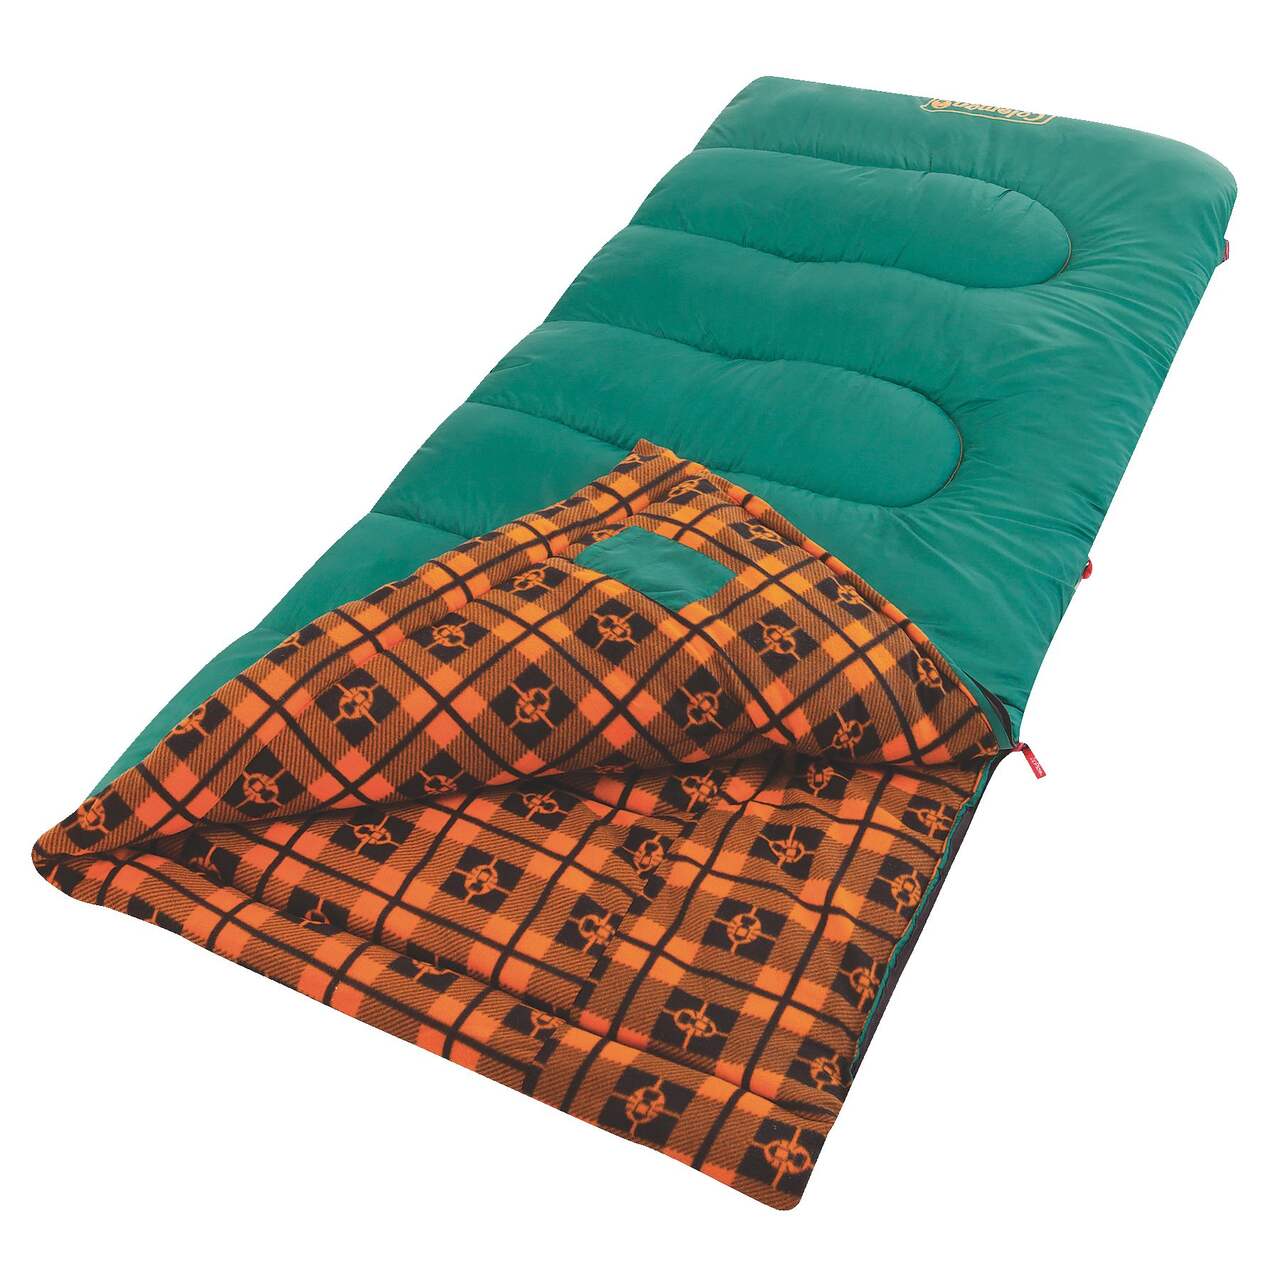 https://media-www.canadiantire.ca/product/playing/camping/camping-furniture/0760767/coleman-granite-peak-sleeping-bag-4lb-44d8bd7d-be6d-4c86-aafe-1dd3238aa1b5-jpgrendition.jpg?imdensity=1&imwidth=1244&impolicy=mZoom